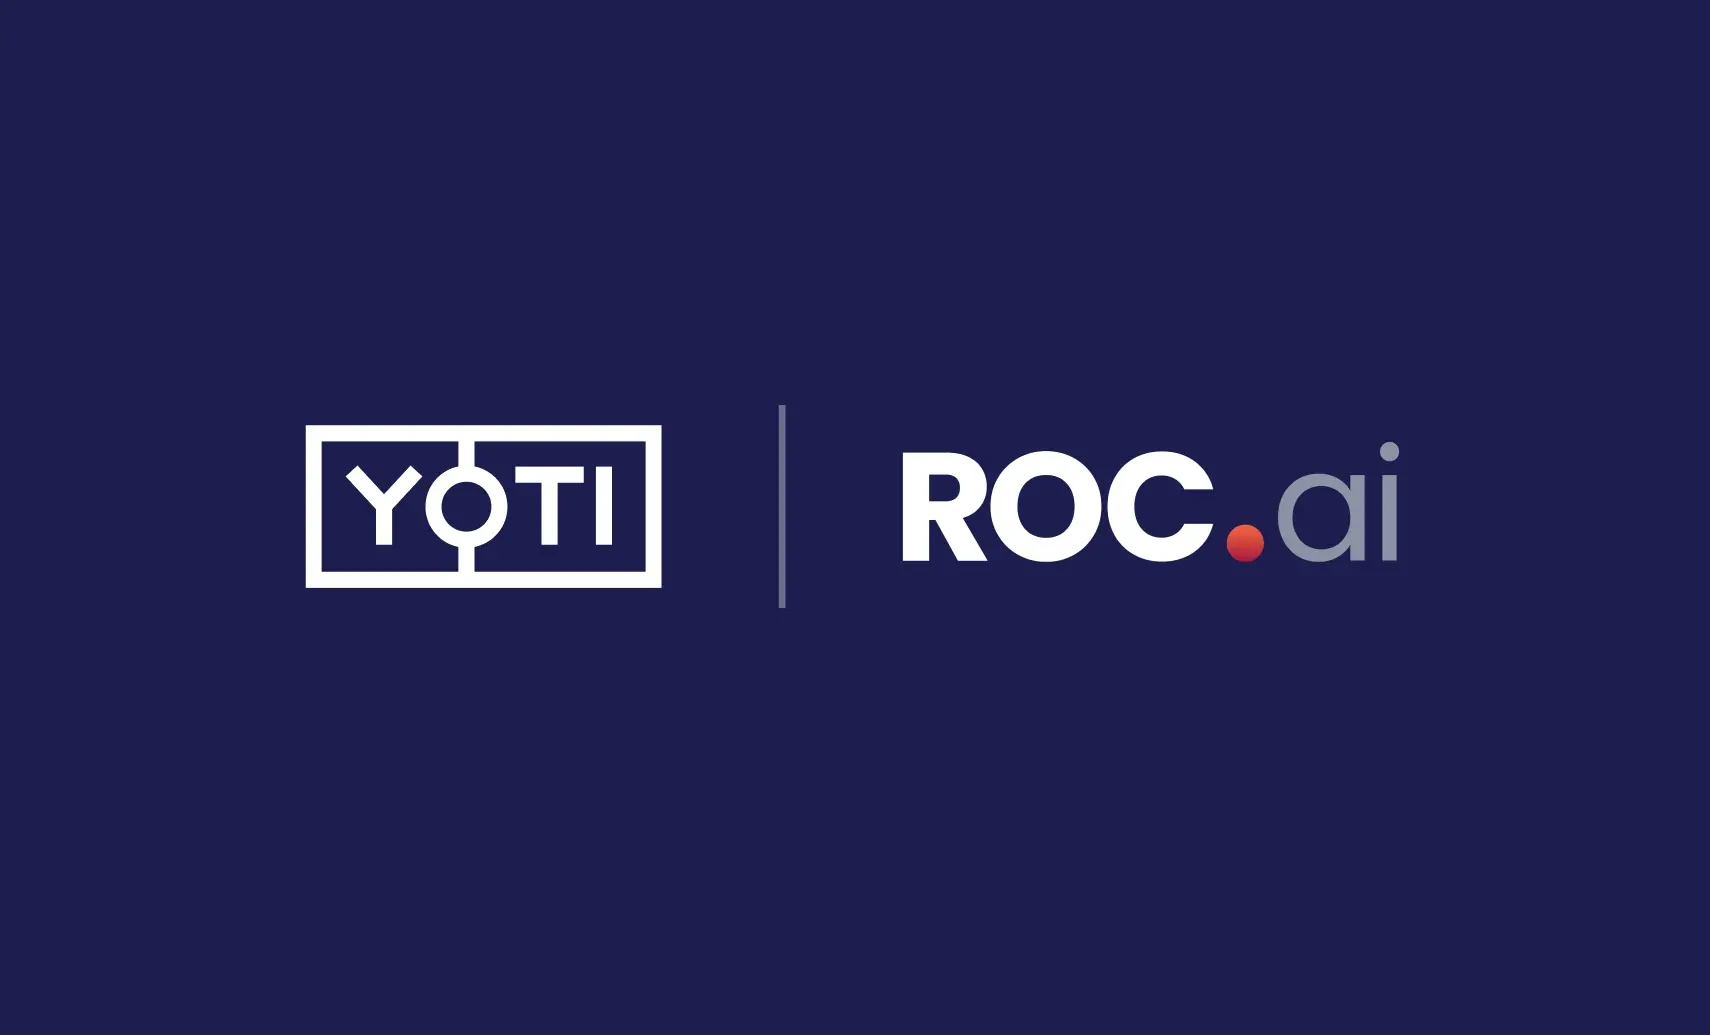 Yoti and ROC.ai logos presented together